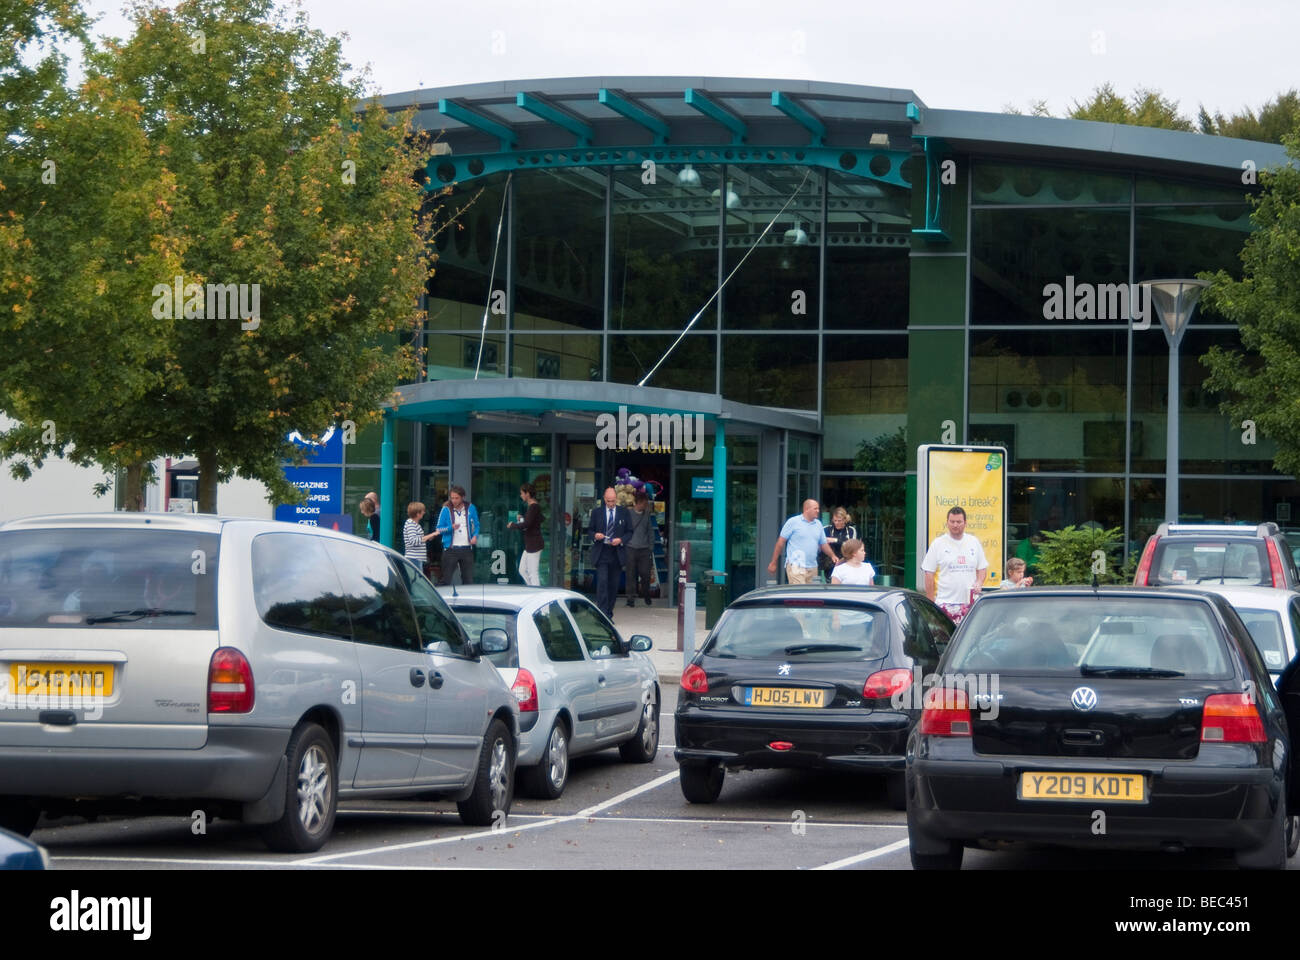 Winchester services on the M3 motorway. Operated by Moto Stock Photo